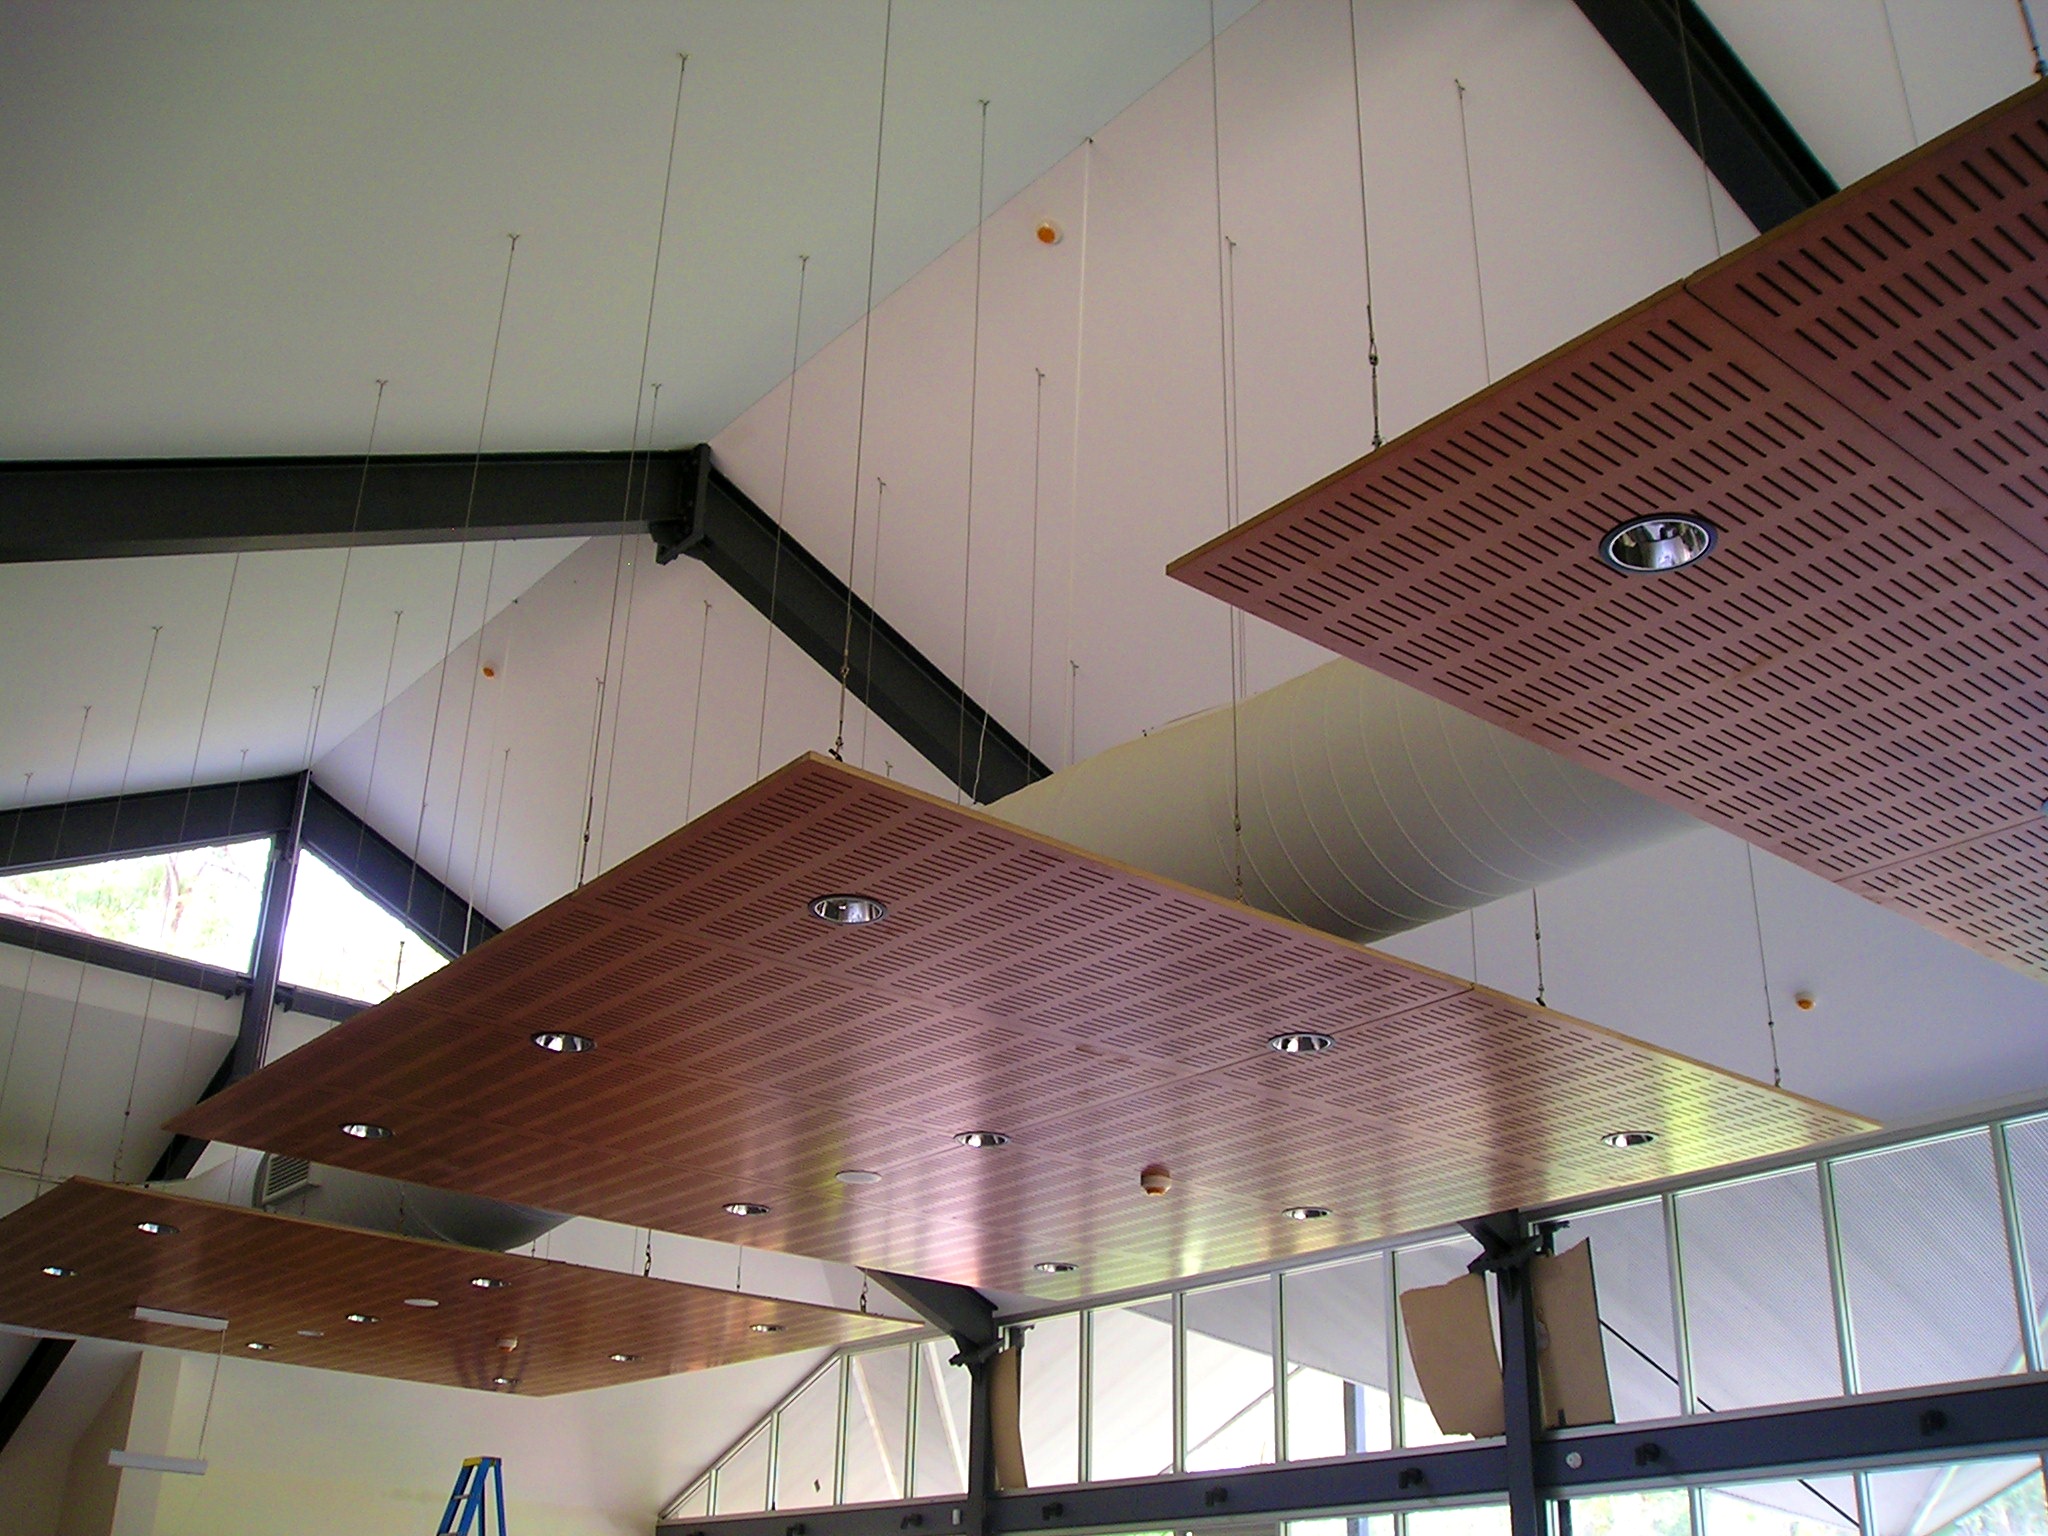 Ceiling can be decorated with decorative ceiling light panels